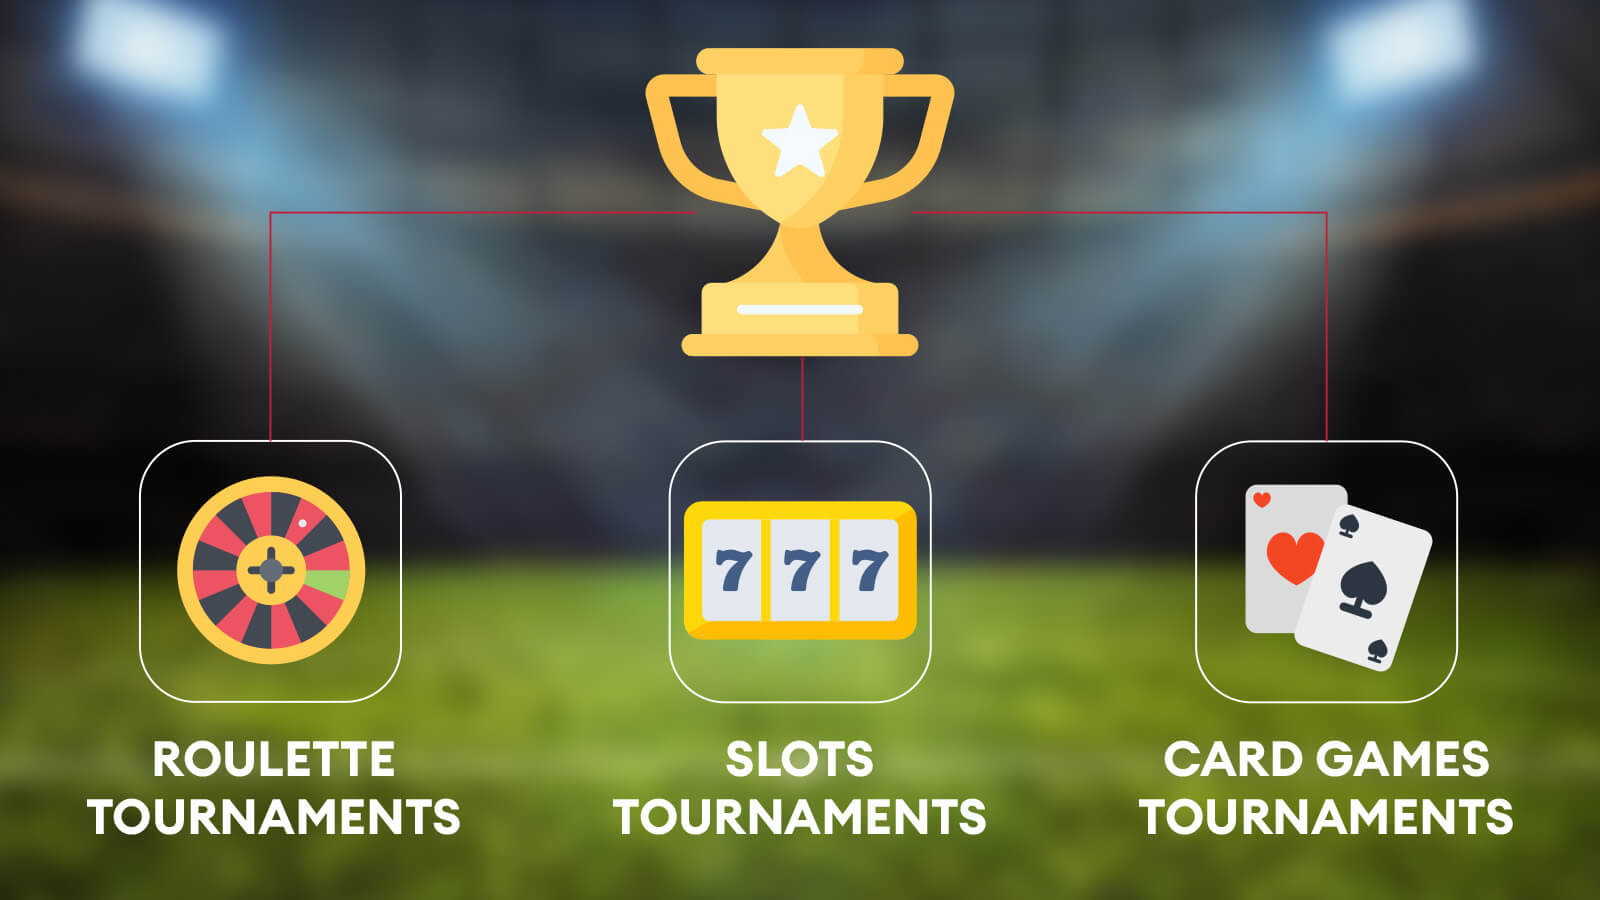 Types-of-Tournaments